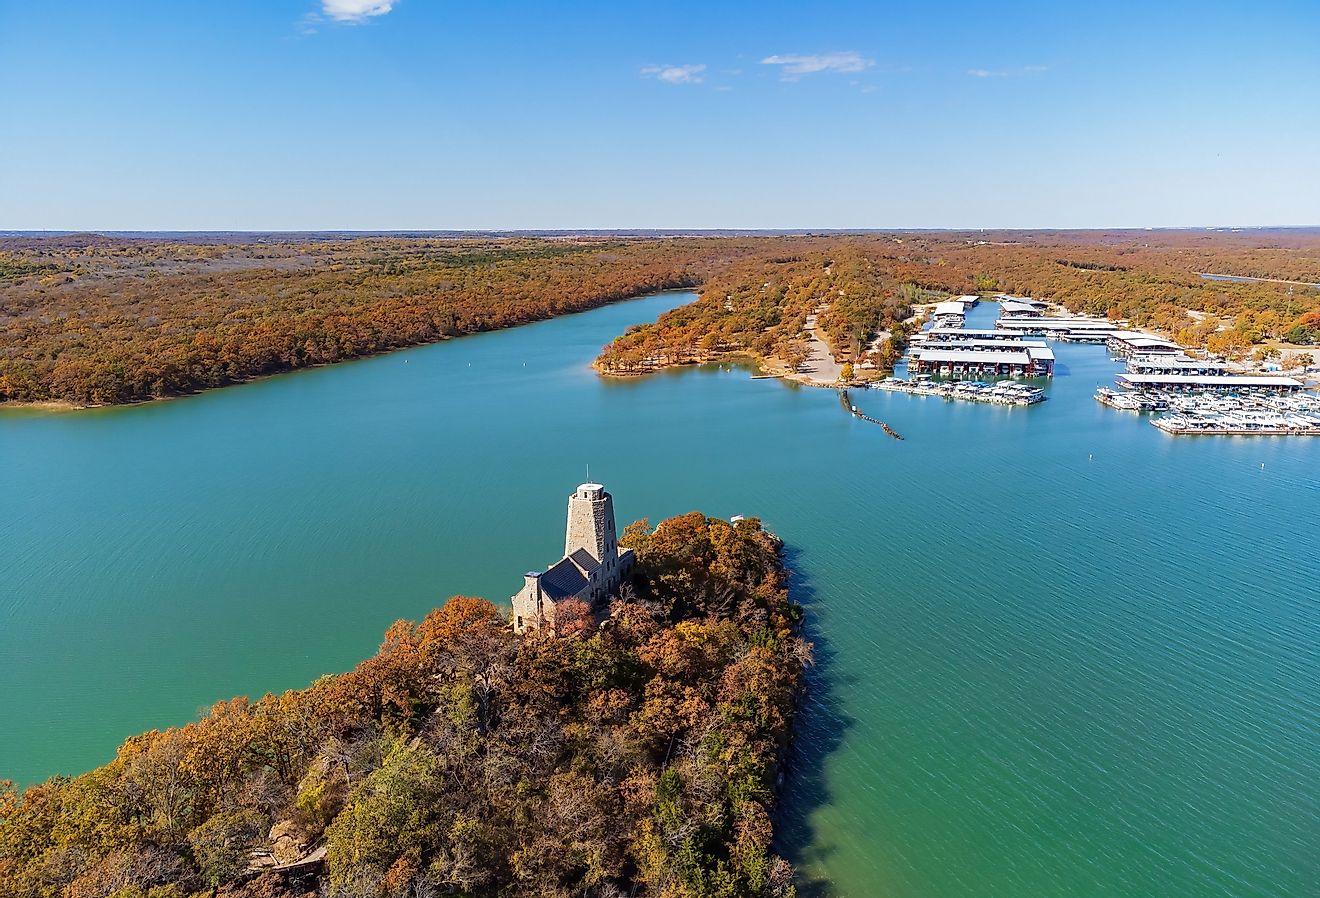 Aerial view of the Tucker Tower of Lake Murray State Park at Oklahoma.